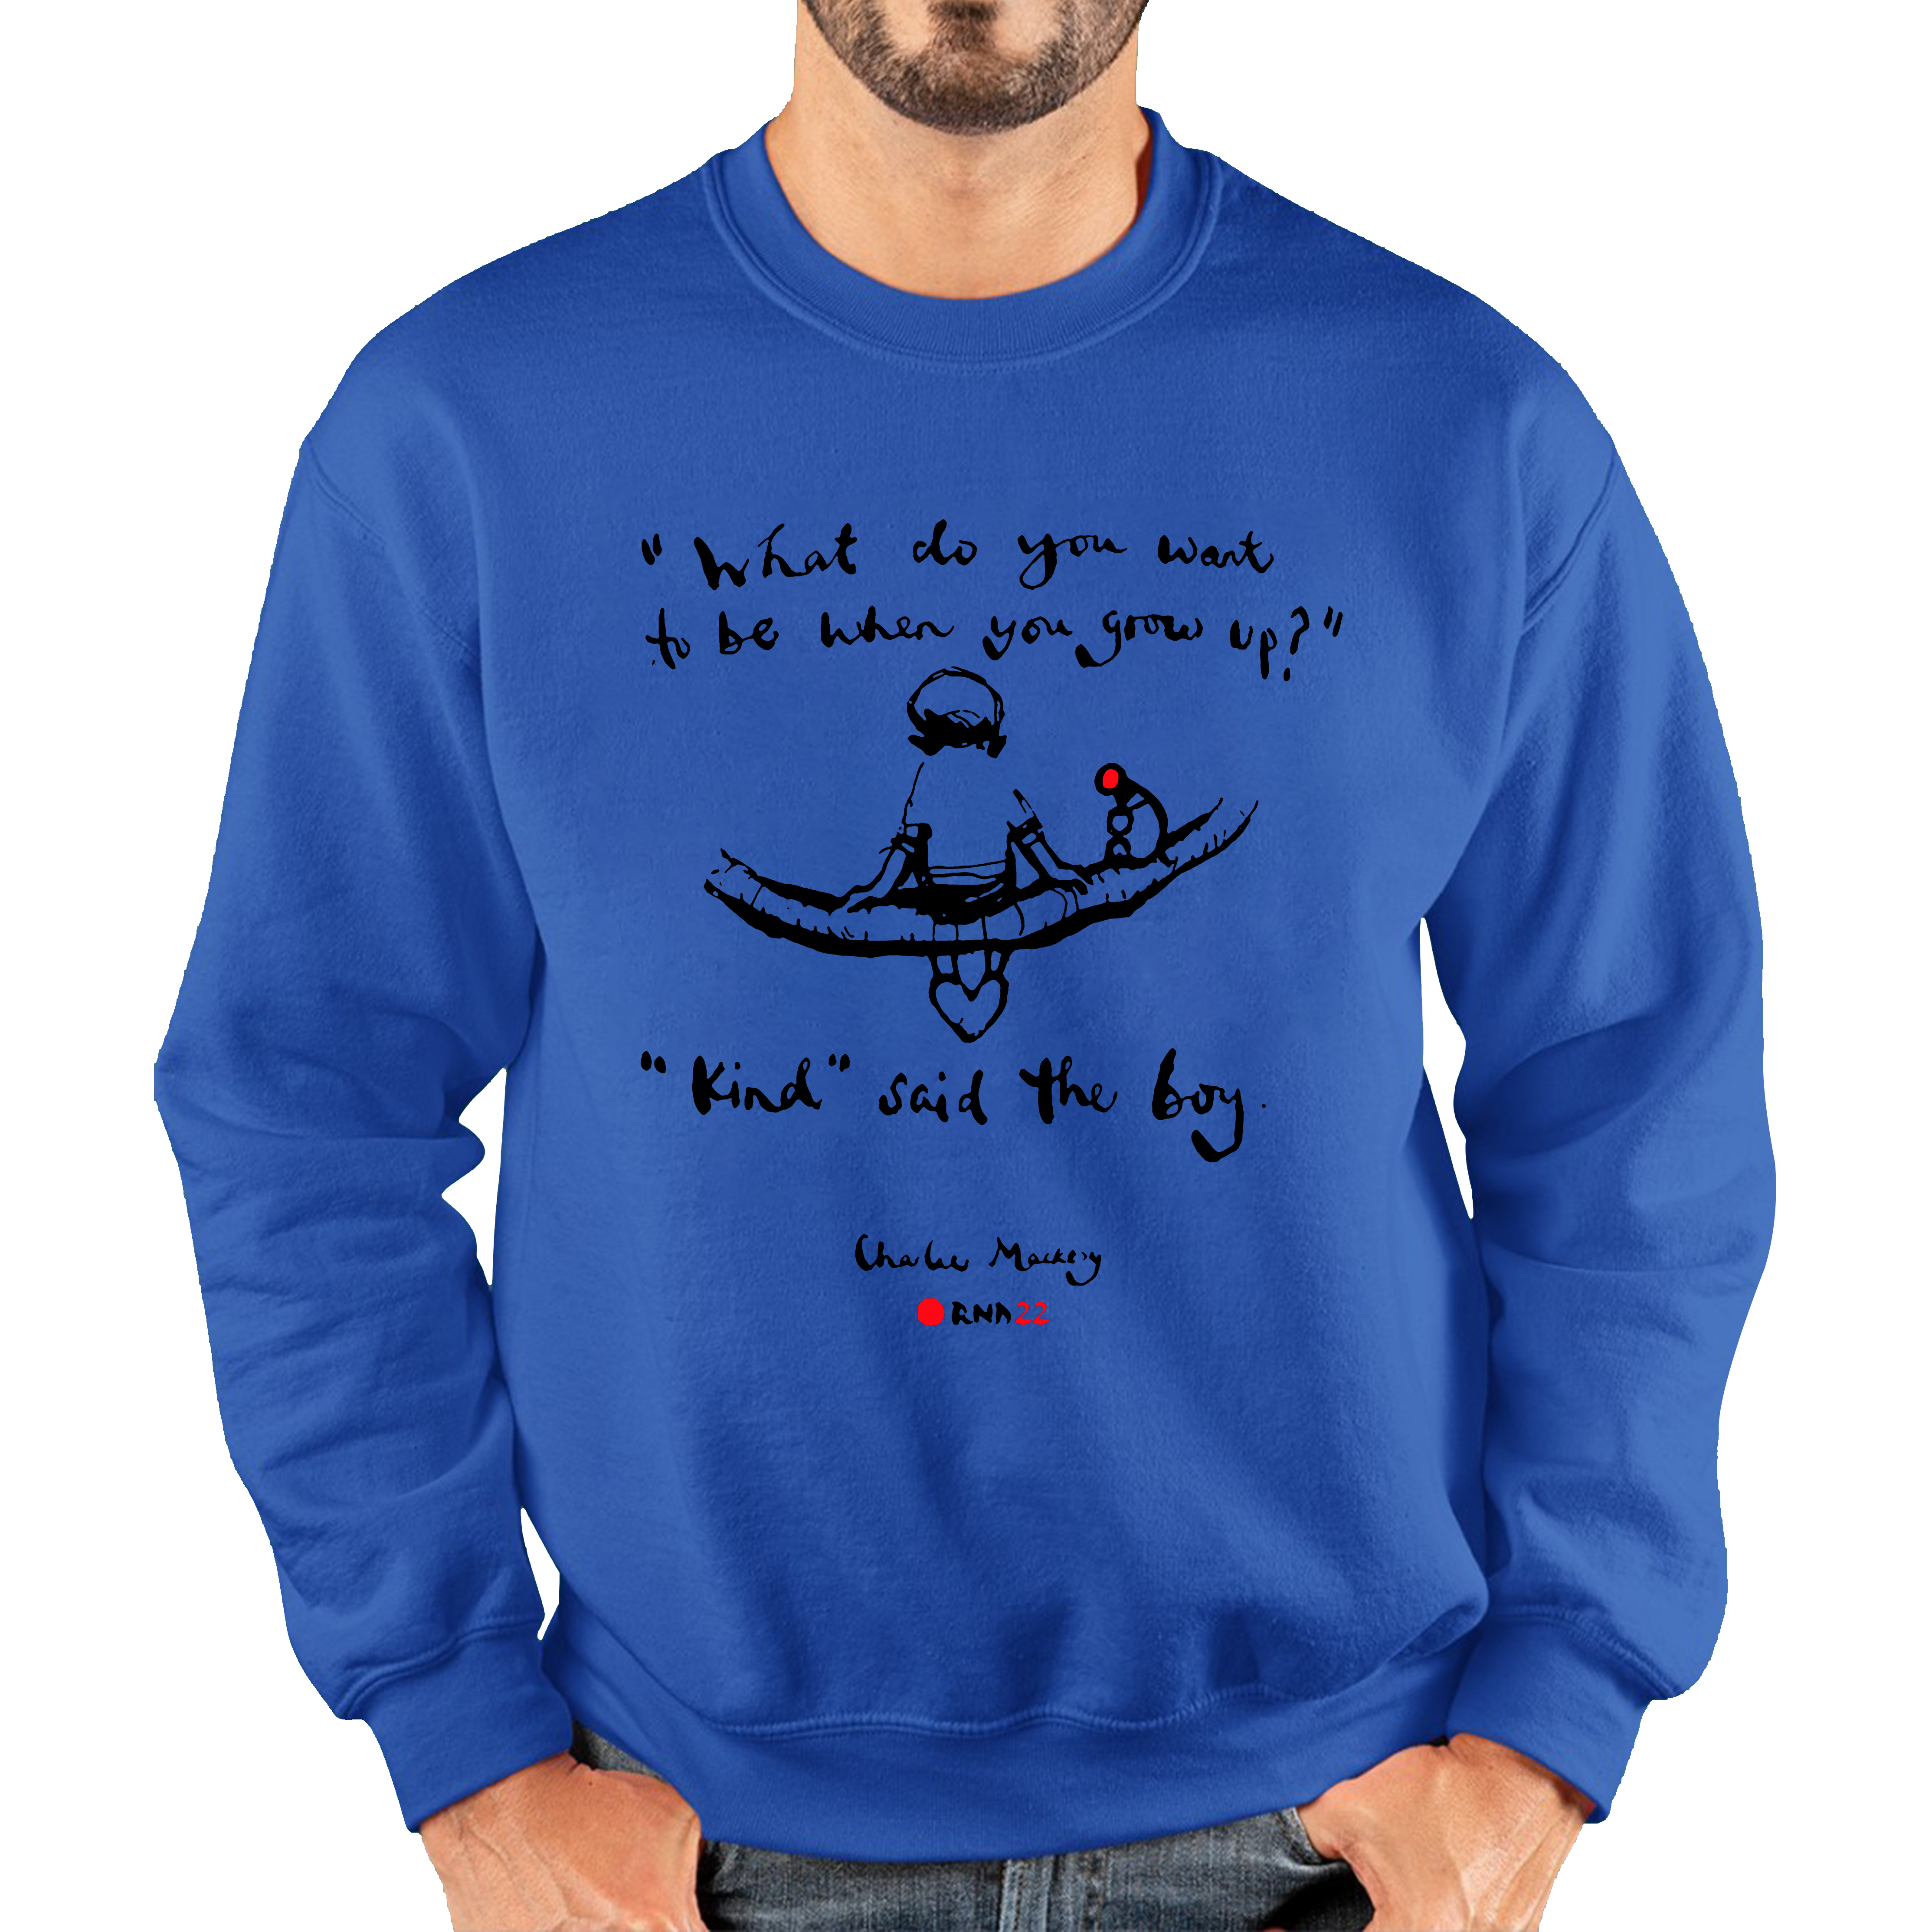 What Do You Want To Be When You Grow Up Kind Said The Boy Charlie Macksey Red Nose Day Adult Sweatshirt. 50% Goes To Charity